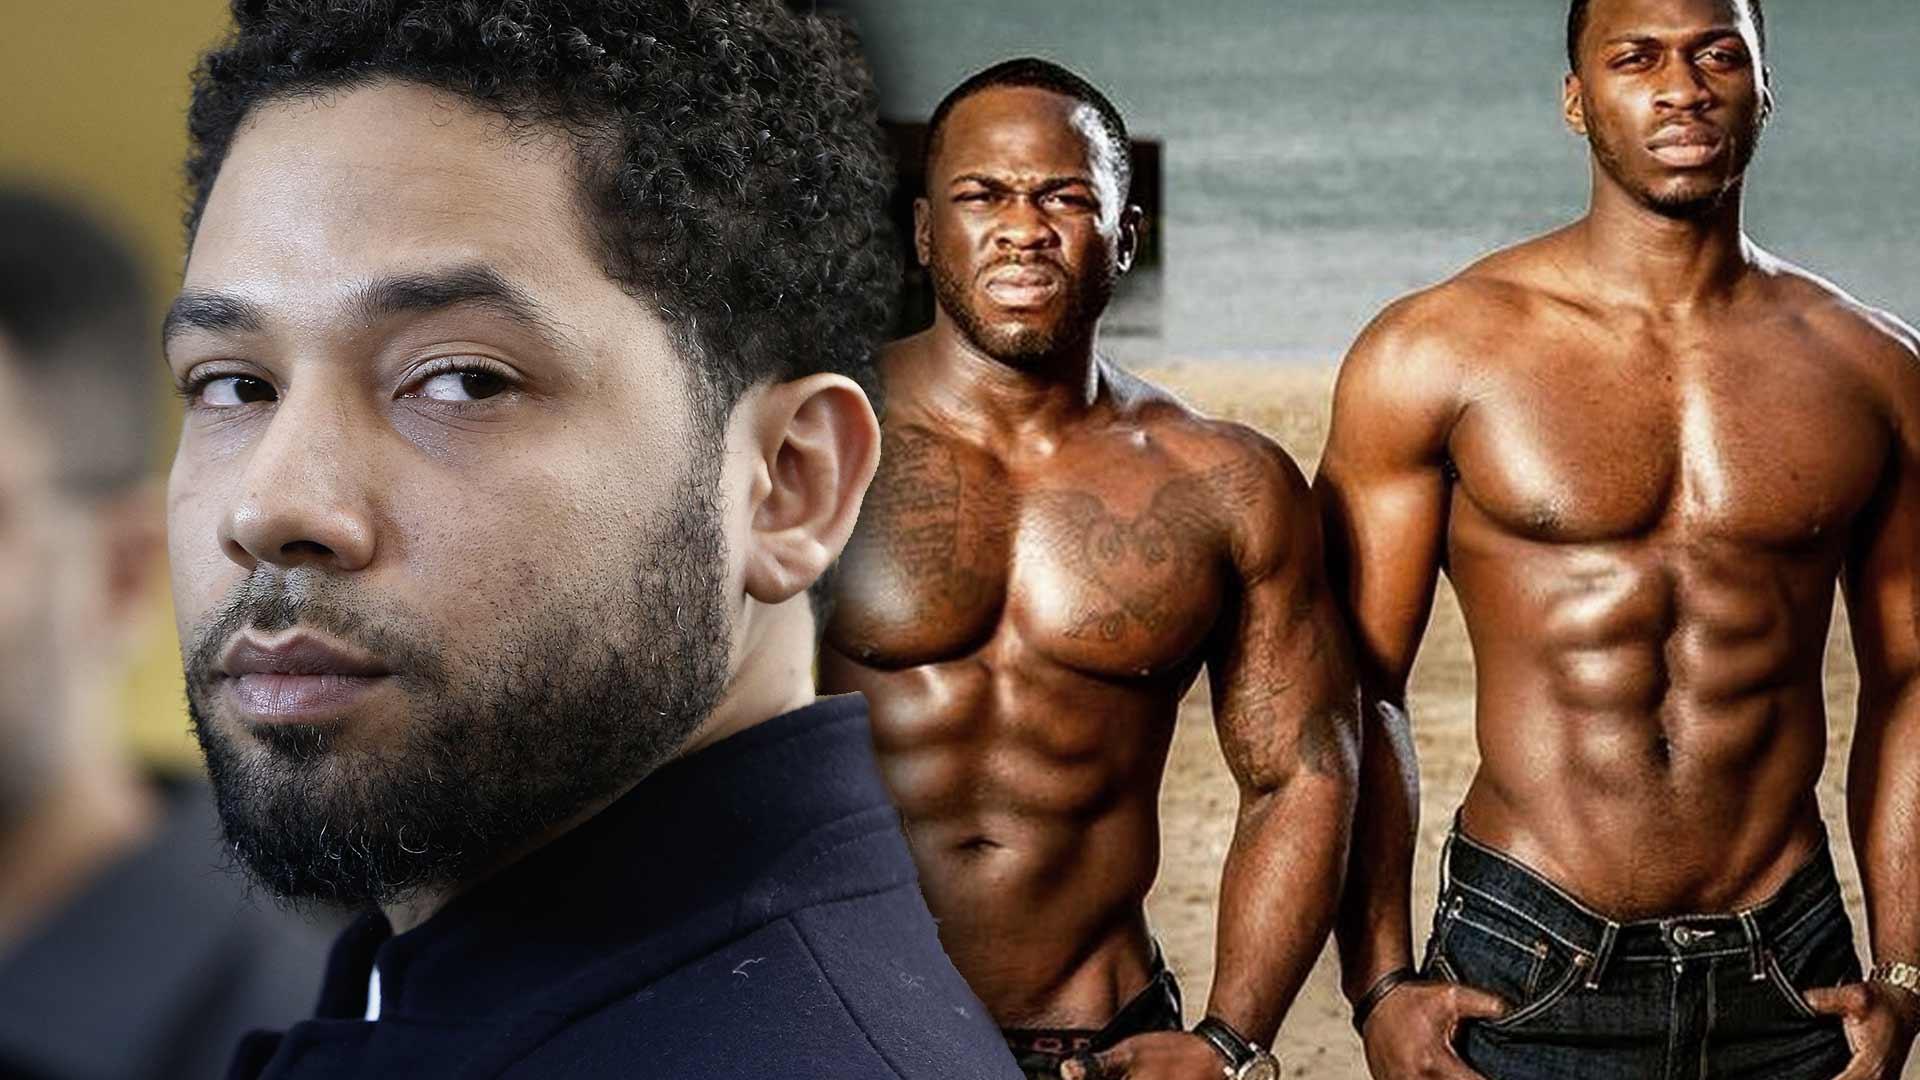 Jussie Smollett Told Police Osundairo Brothers Could Not Have Attacked Him Because ‘They Are Black As Sin’